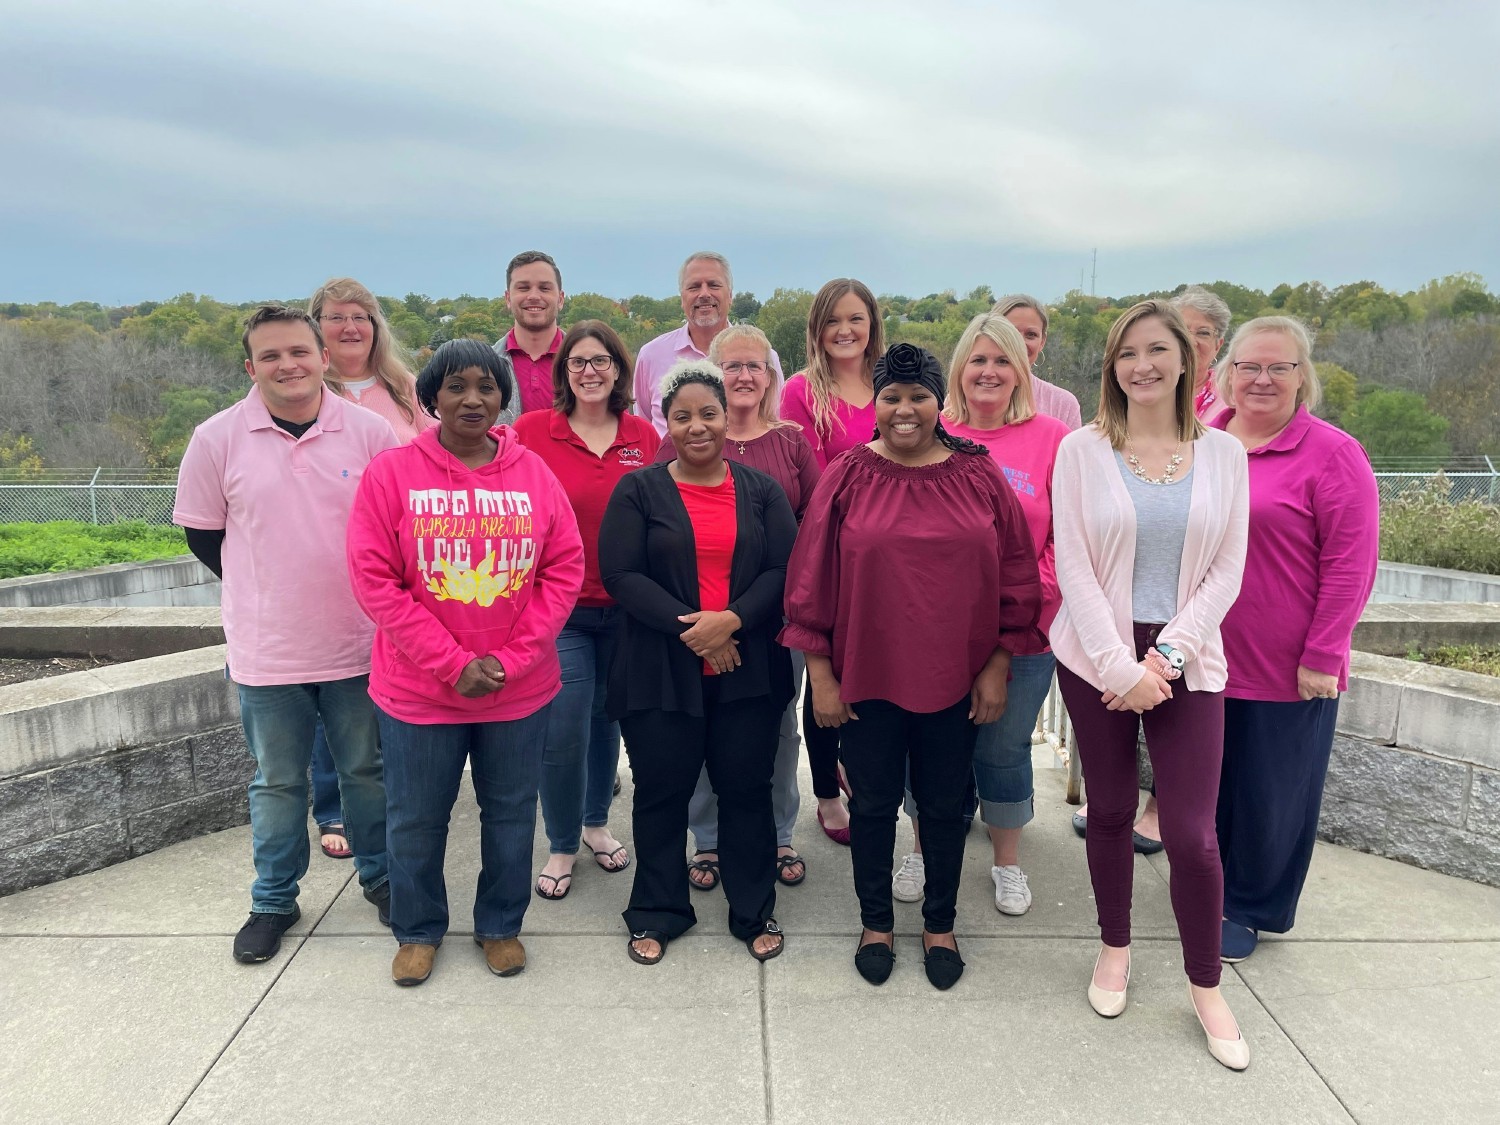 MSI joins together in wearing pink to show support during Breast Cancer Awareness Month.